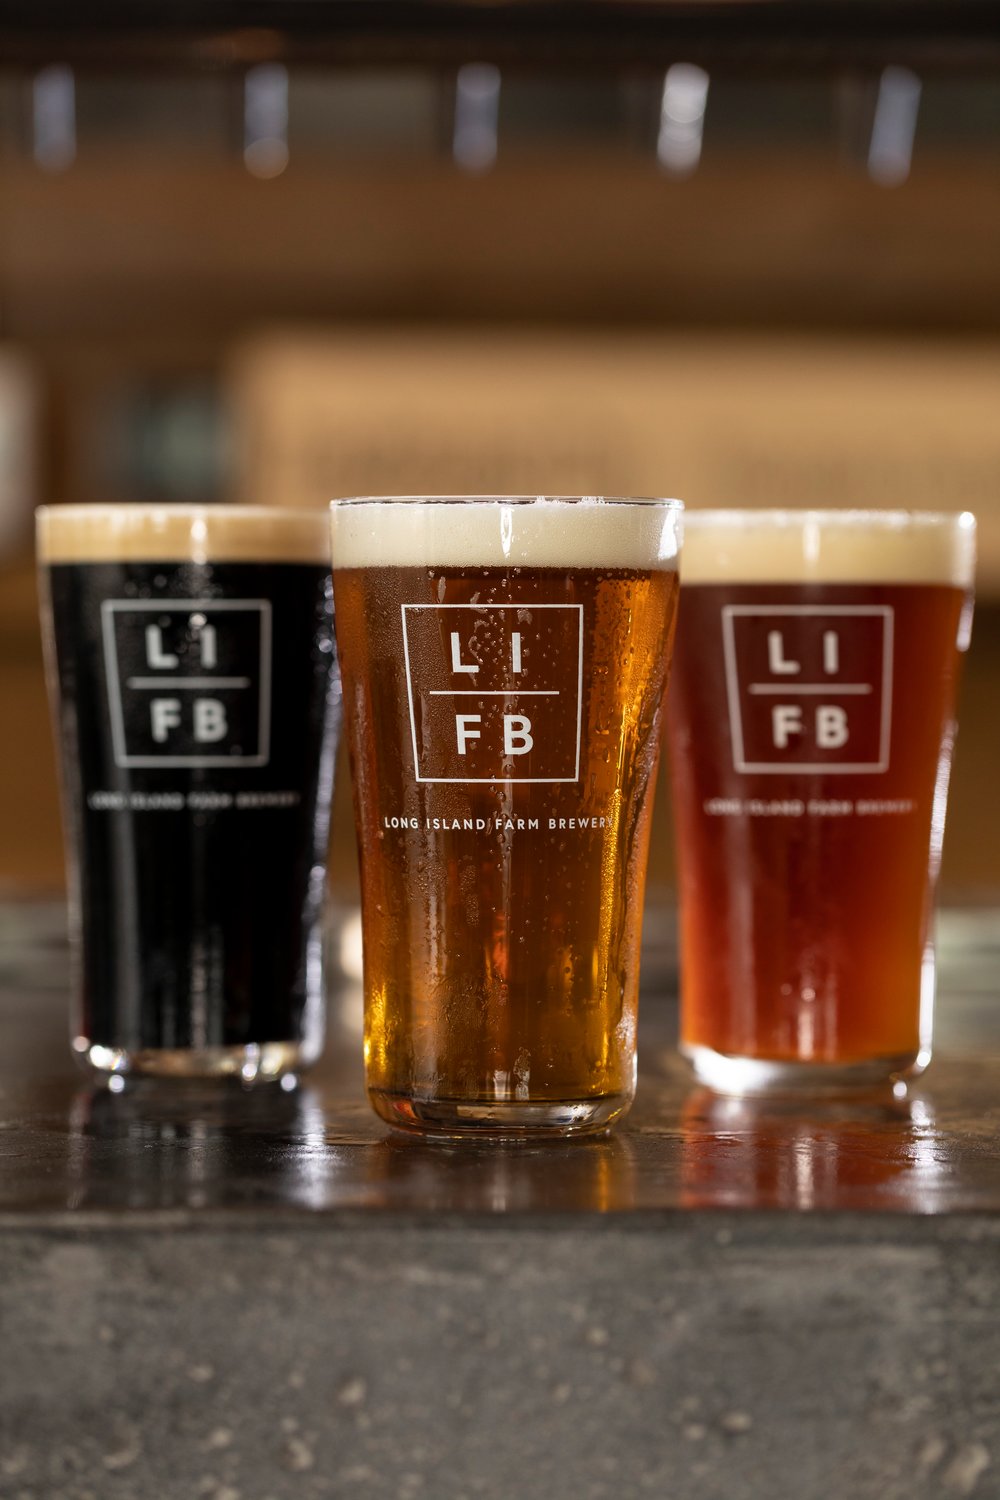 About 10 LIFB original brews will be on tap at any given time.